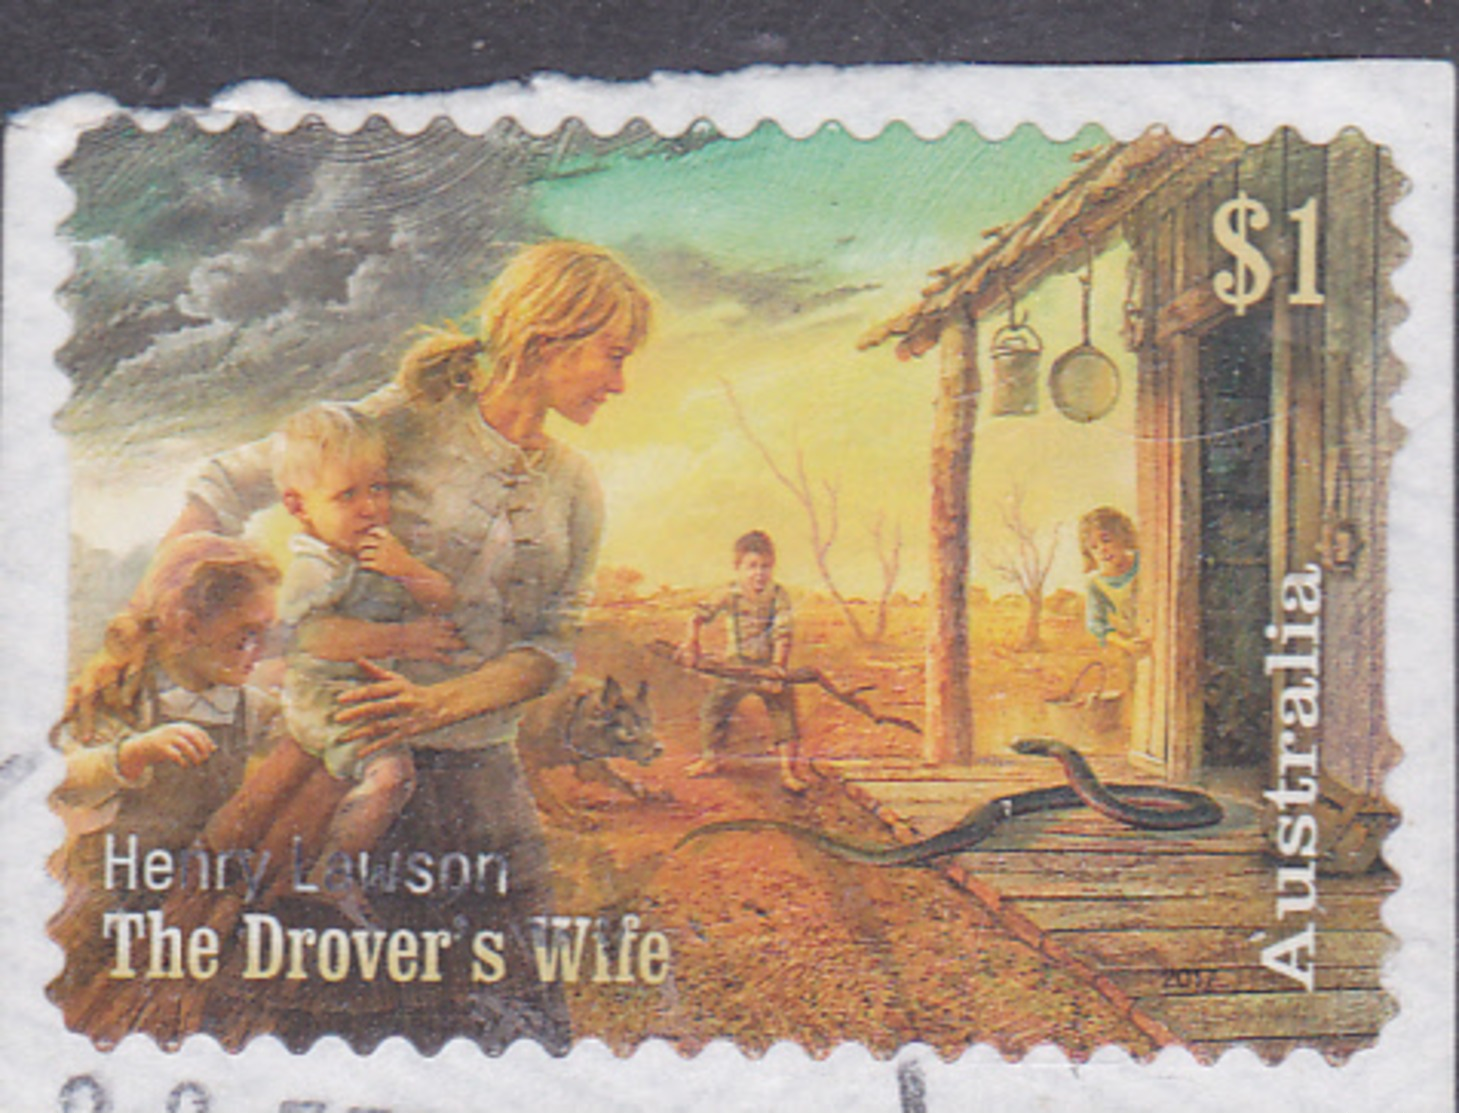 2017. AUSTRALIAN DECIMAL. Henry Lawson. $1. The Drovers Wife. P&S. FU. - Used Stamps